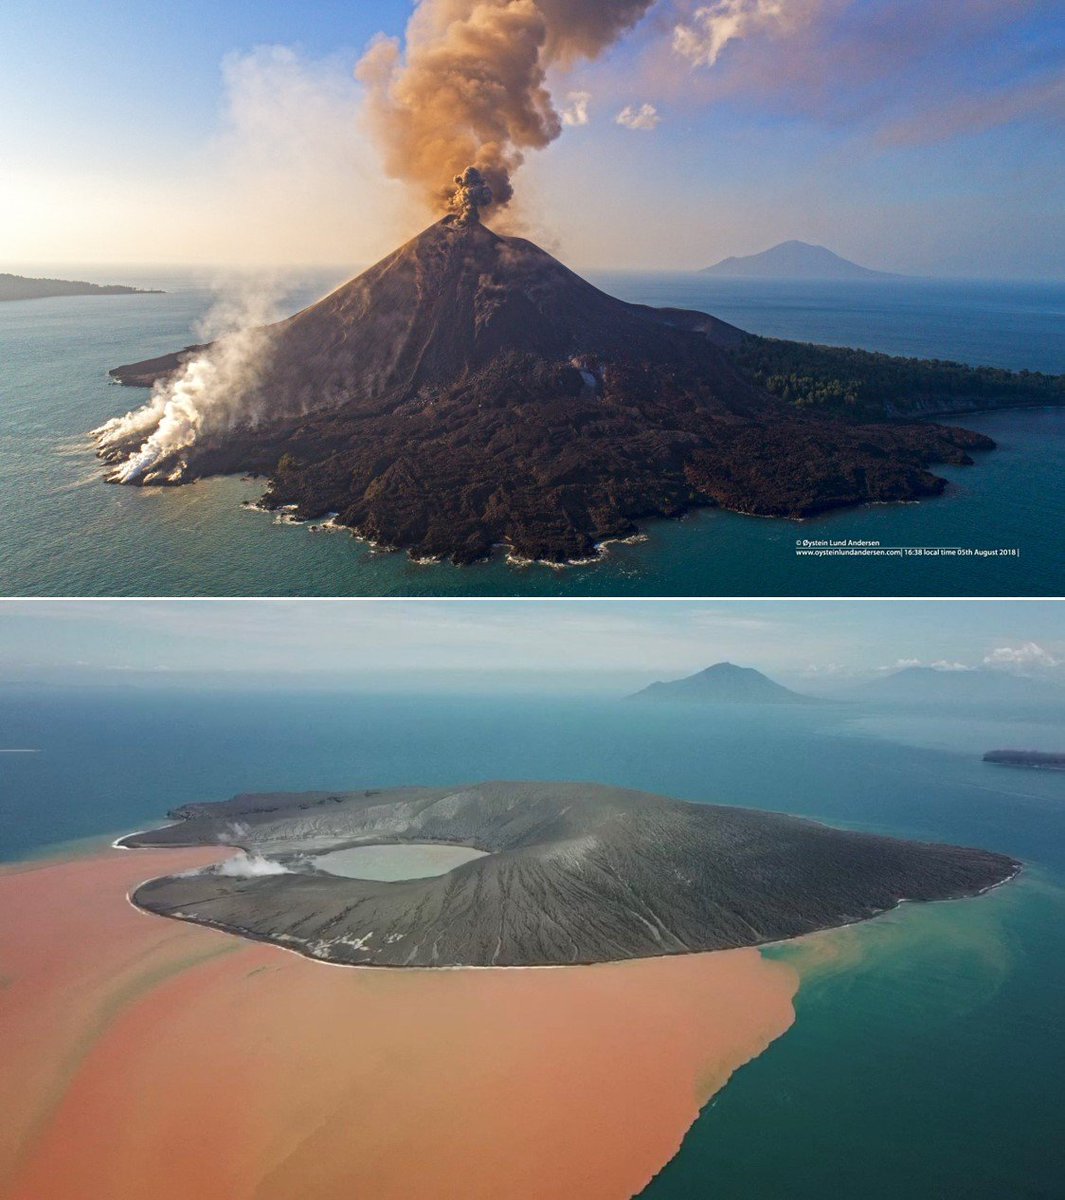 You can see the huge difference, when it collapsed in 2018 it completely changed the island shape.For more information on recent activity & photos go here:  https://volcano.si.edu/showreport.cfm?doi=10.5479/si.GVP.BGVN201903-262000 & here:  https://volcano.si.edu/showreport.cfm?doi=10.5479/si.GVP.BGVN201908-262000Photos:  @EarthUncutTV  @OysteinLAnderse  #Krakatau not  #Krakatoa